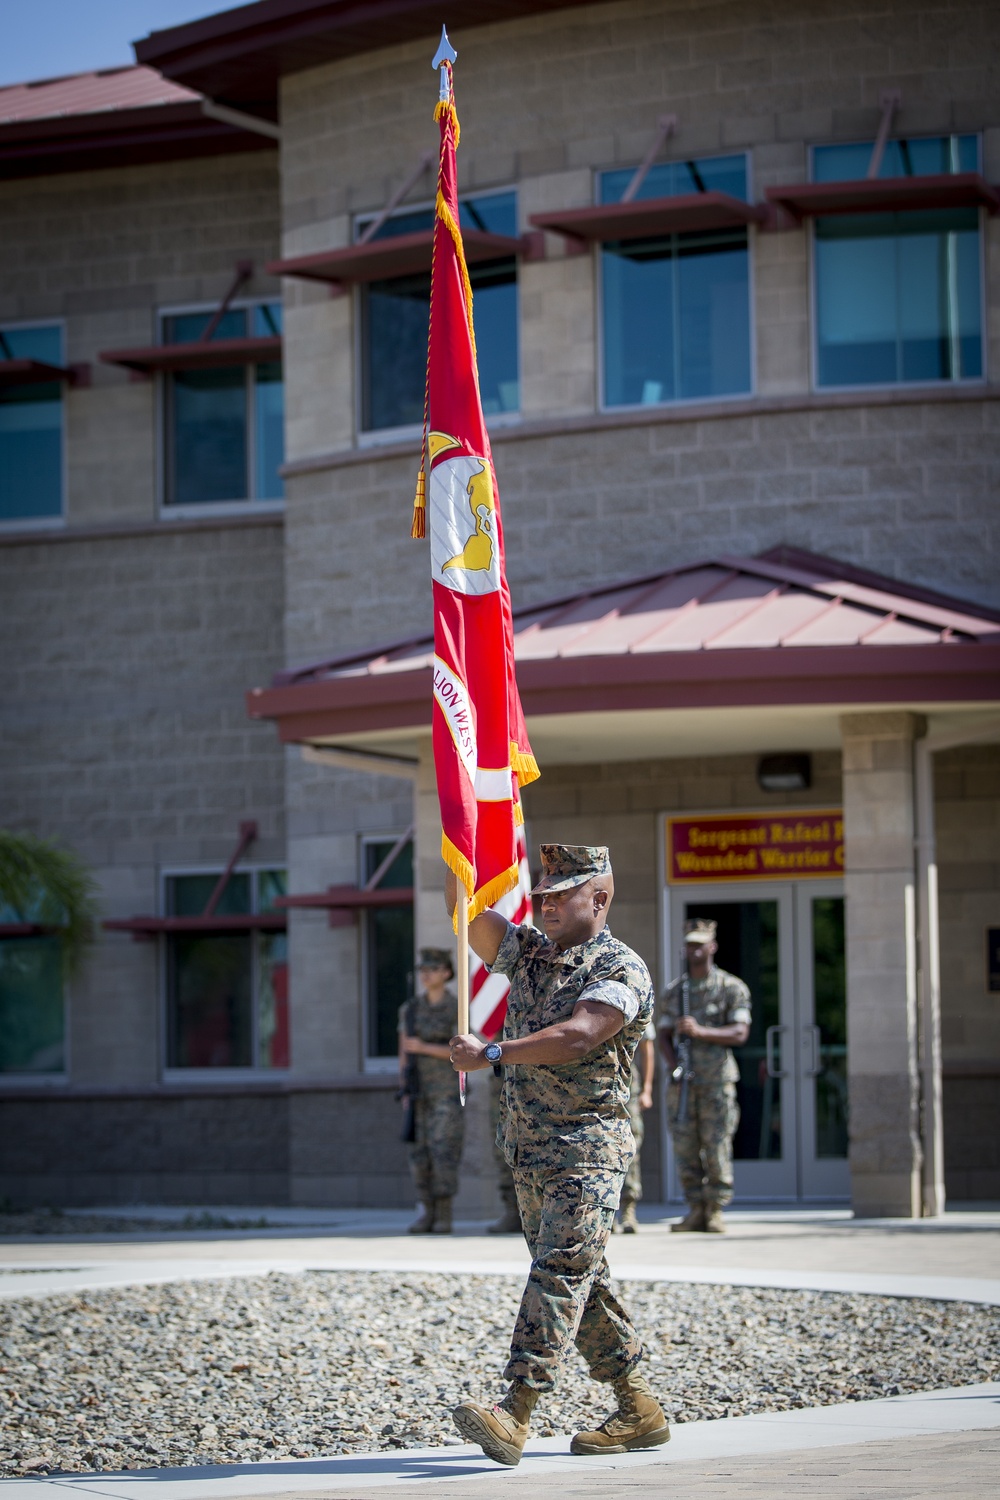 Wounded Warrior Battalion-West change of command ceremony: From one CO to another